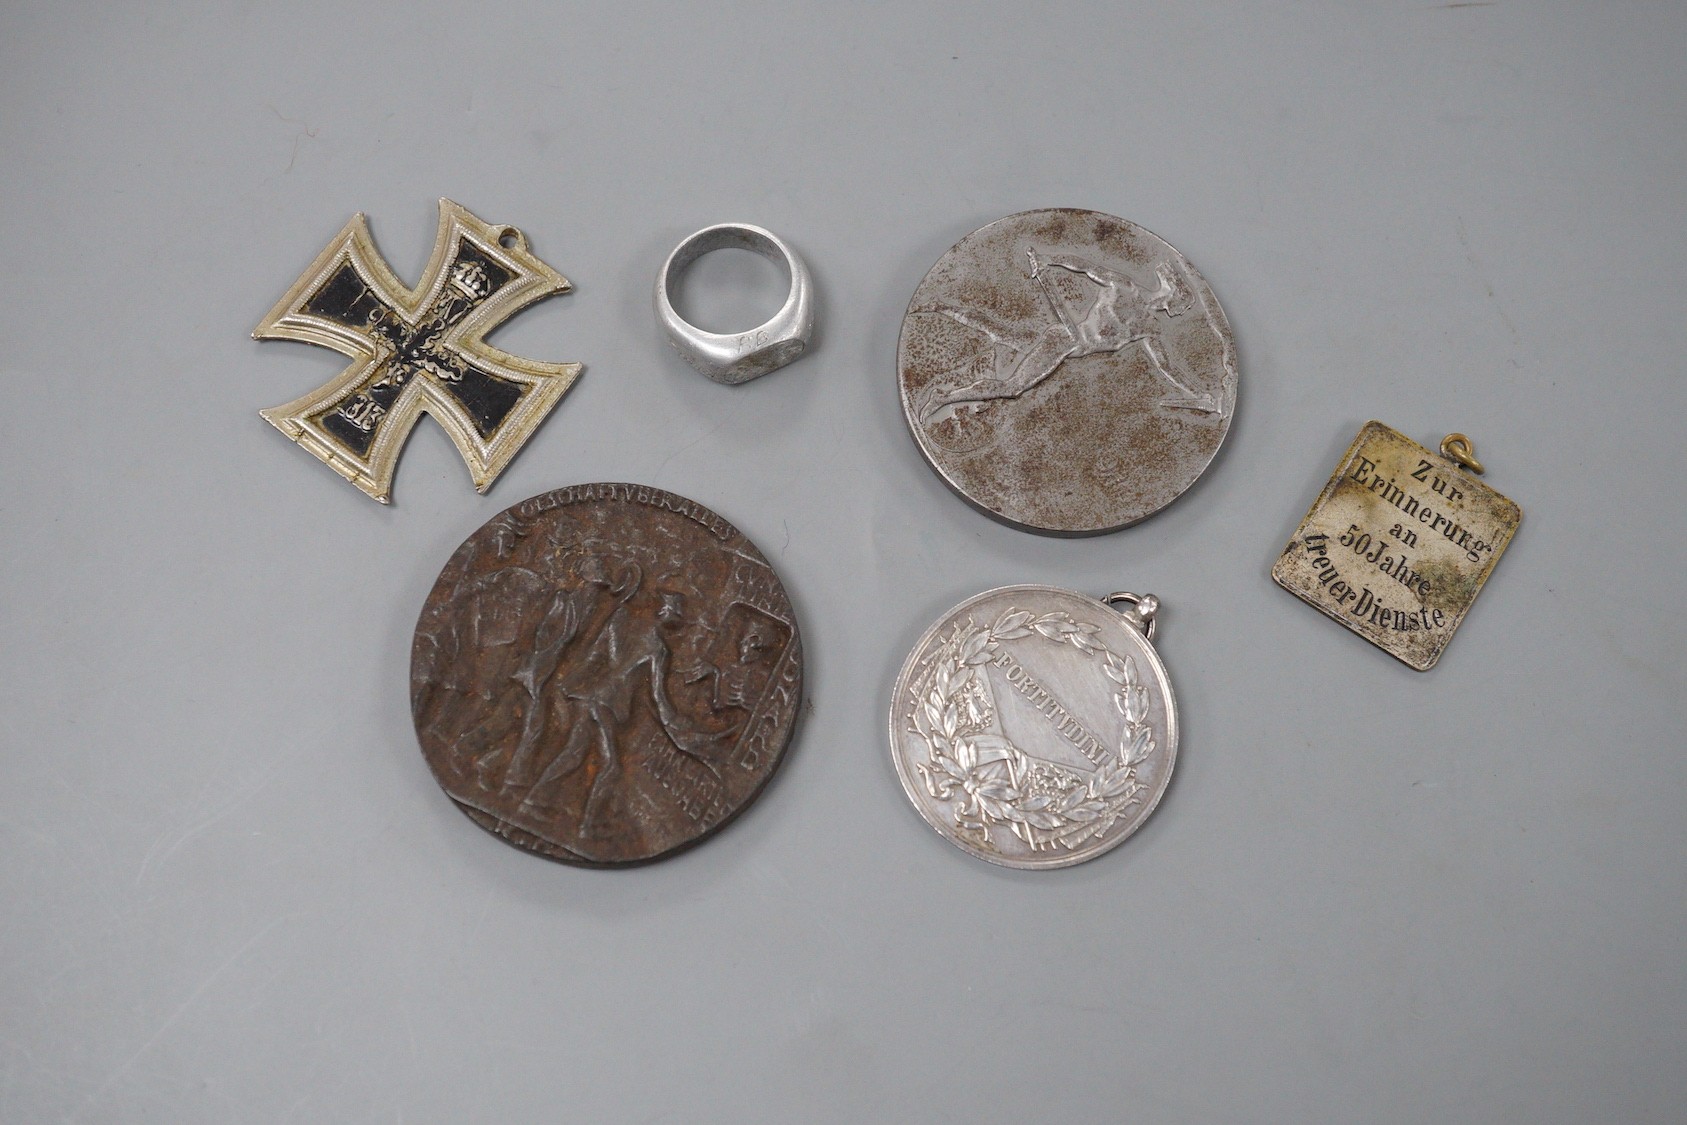 WWI German and Austrian medals, badges and objects, comprising a Zeppelin commemorative aluminium ring, engraved ‘ZEPP L31 OCT. 1916, made from the wreck of Zeppelin LZ31 which was destroyed on the 16th of September 1916